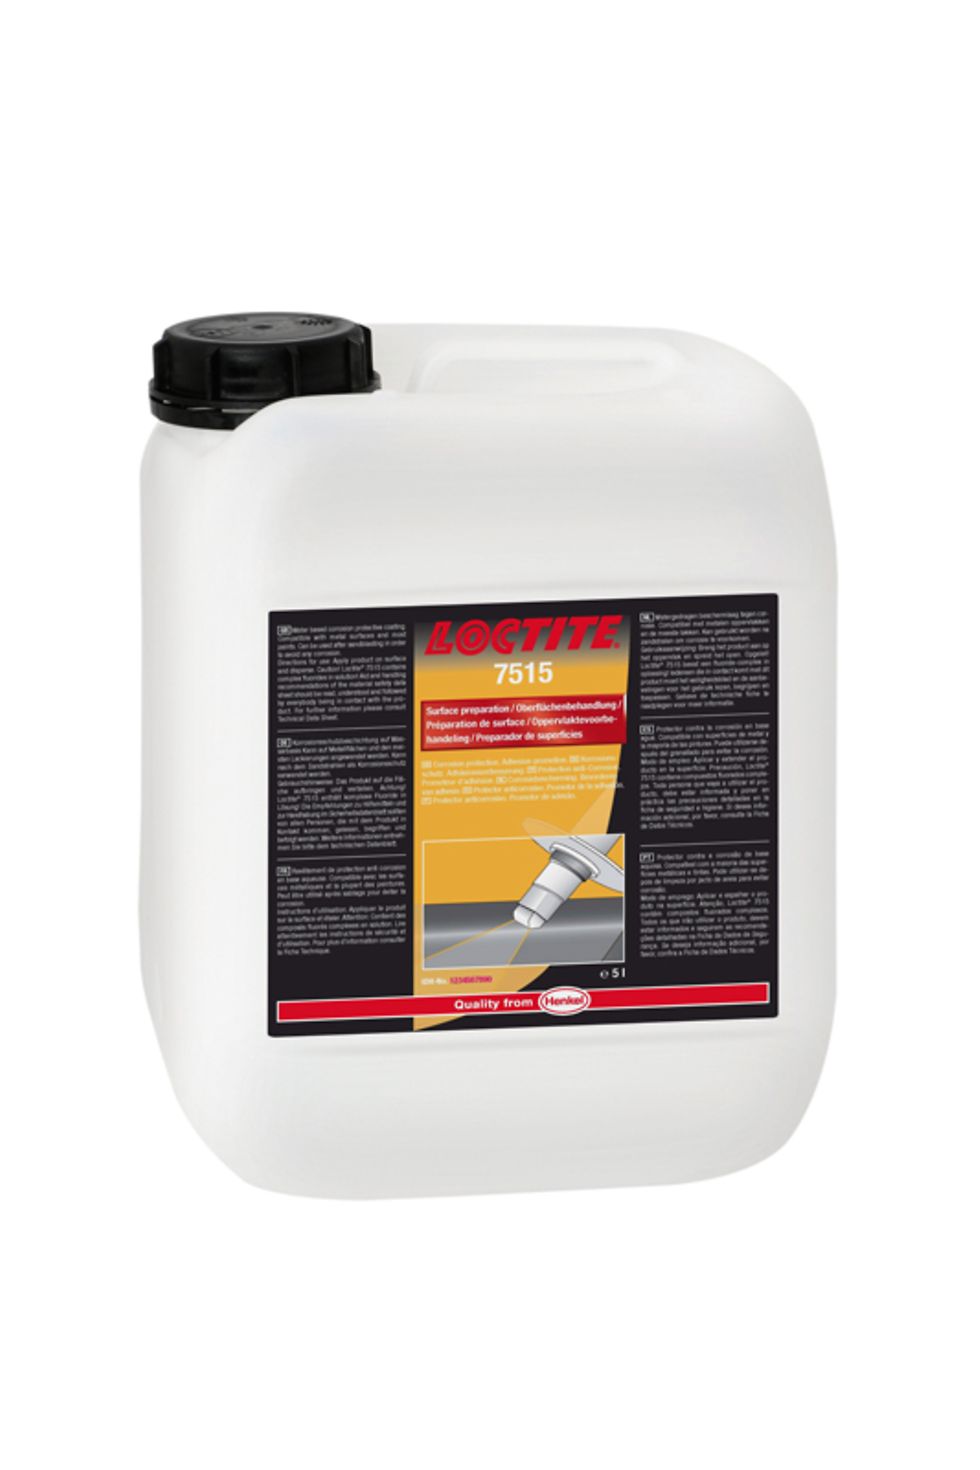 The corrosion inhibitor Loctite SF 7515 